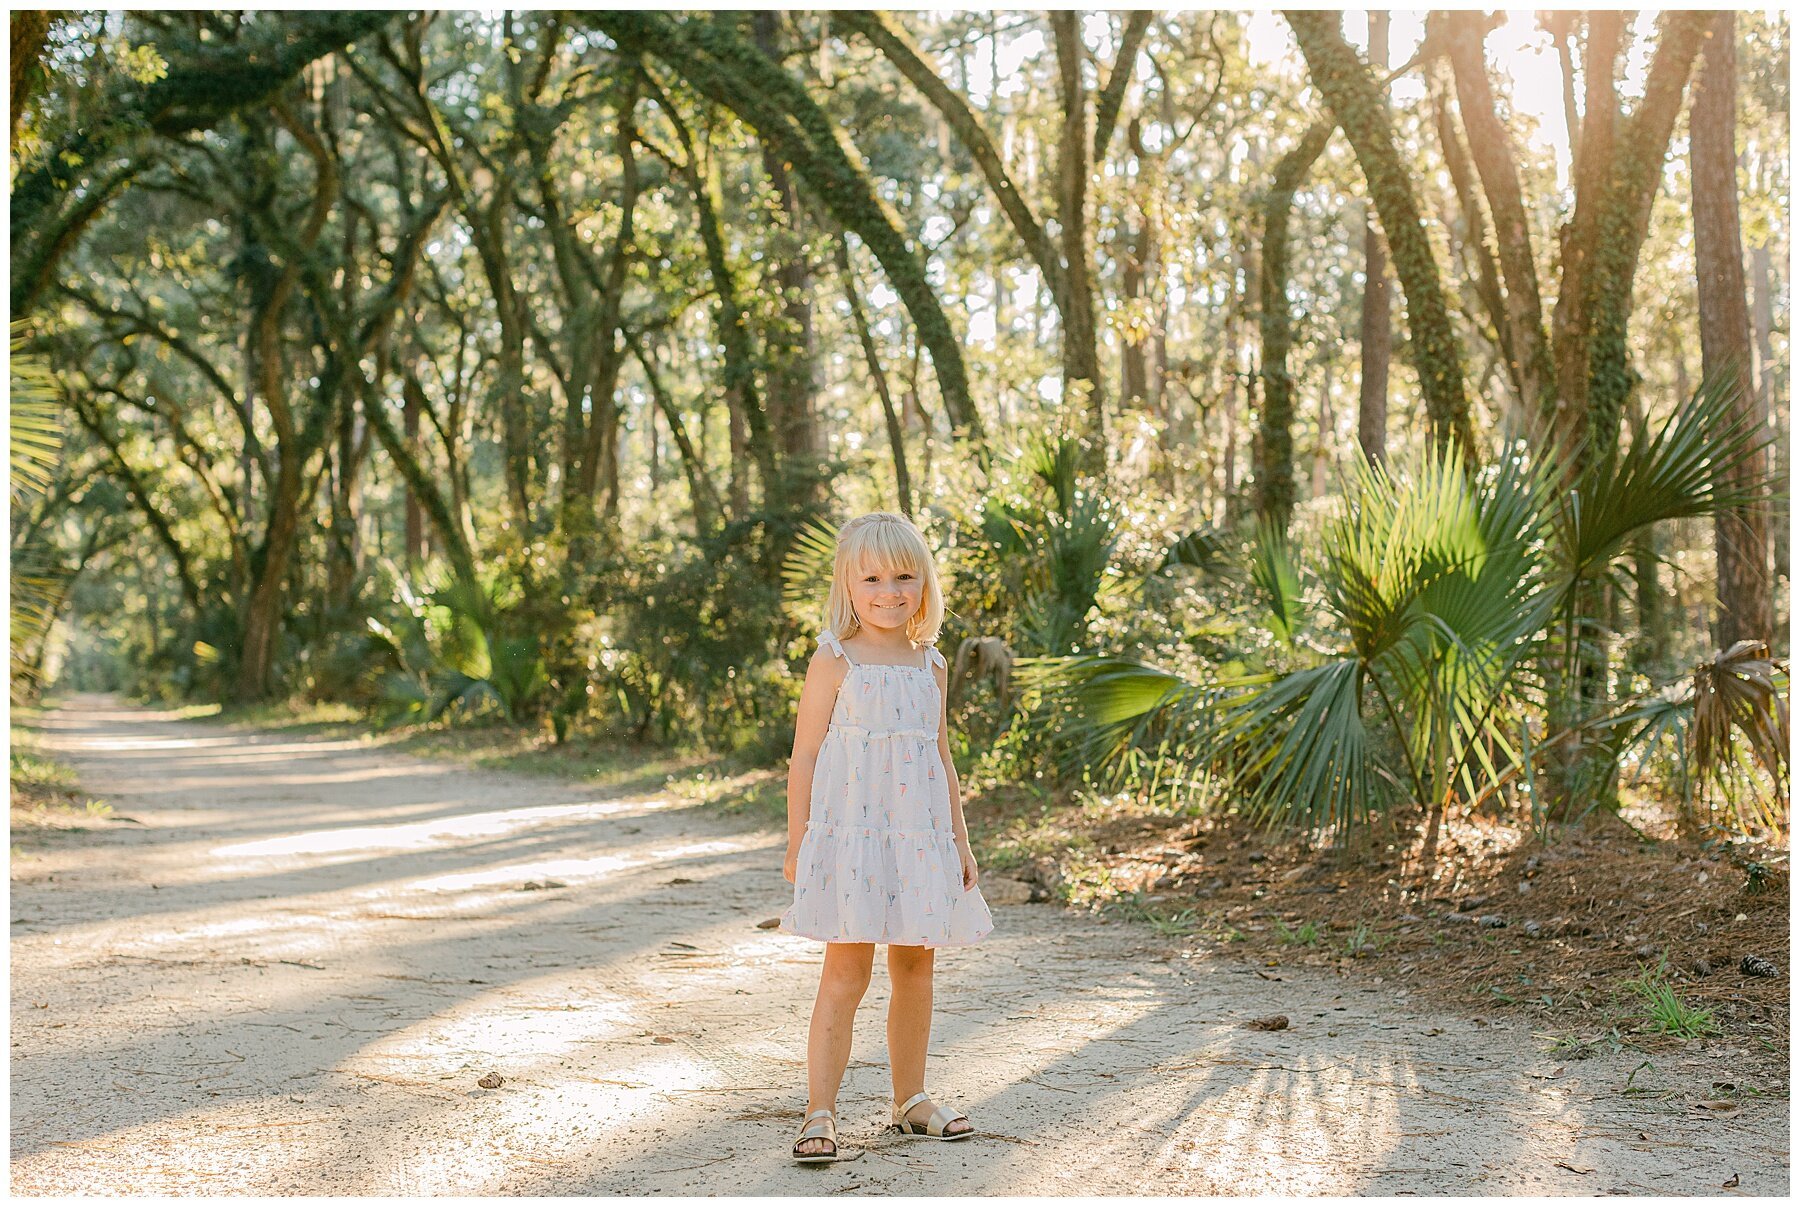 Katherine_Ives_Photography_Mcmillen_Montage_Palmetto_Bluff_4.jpg